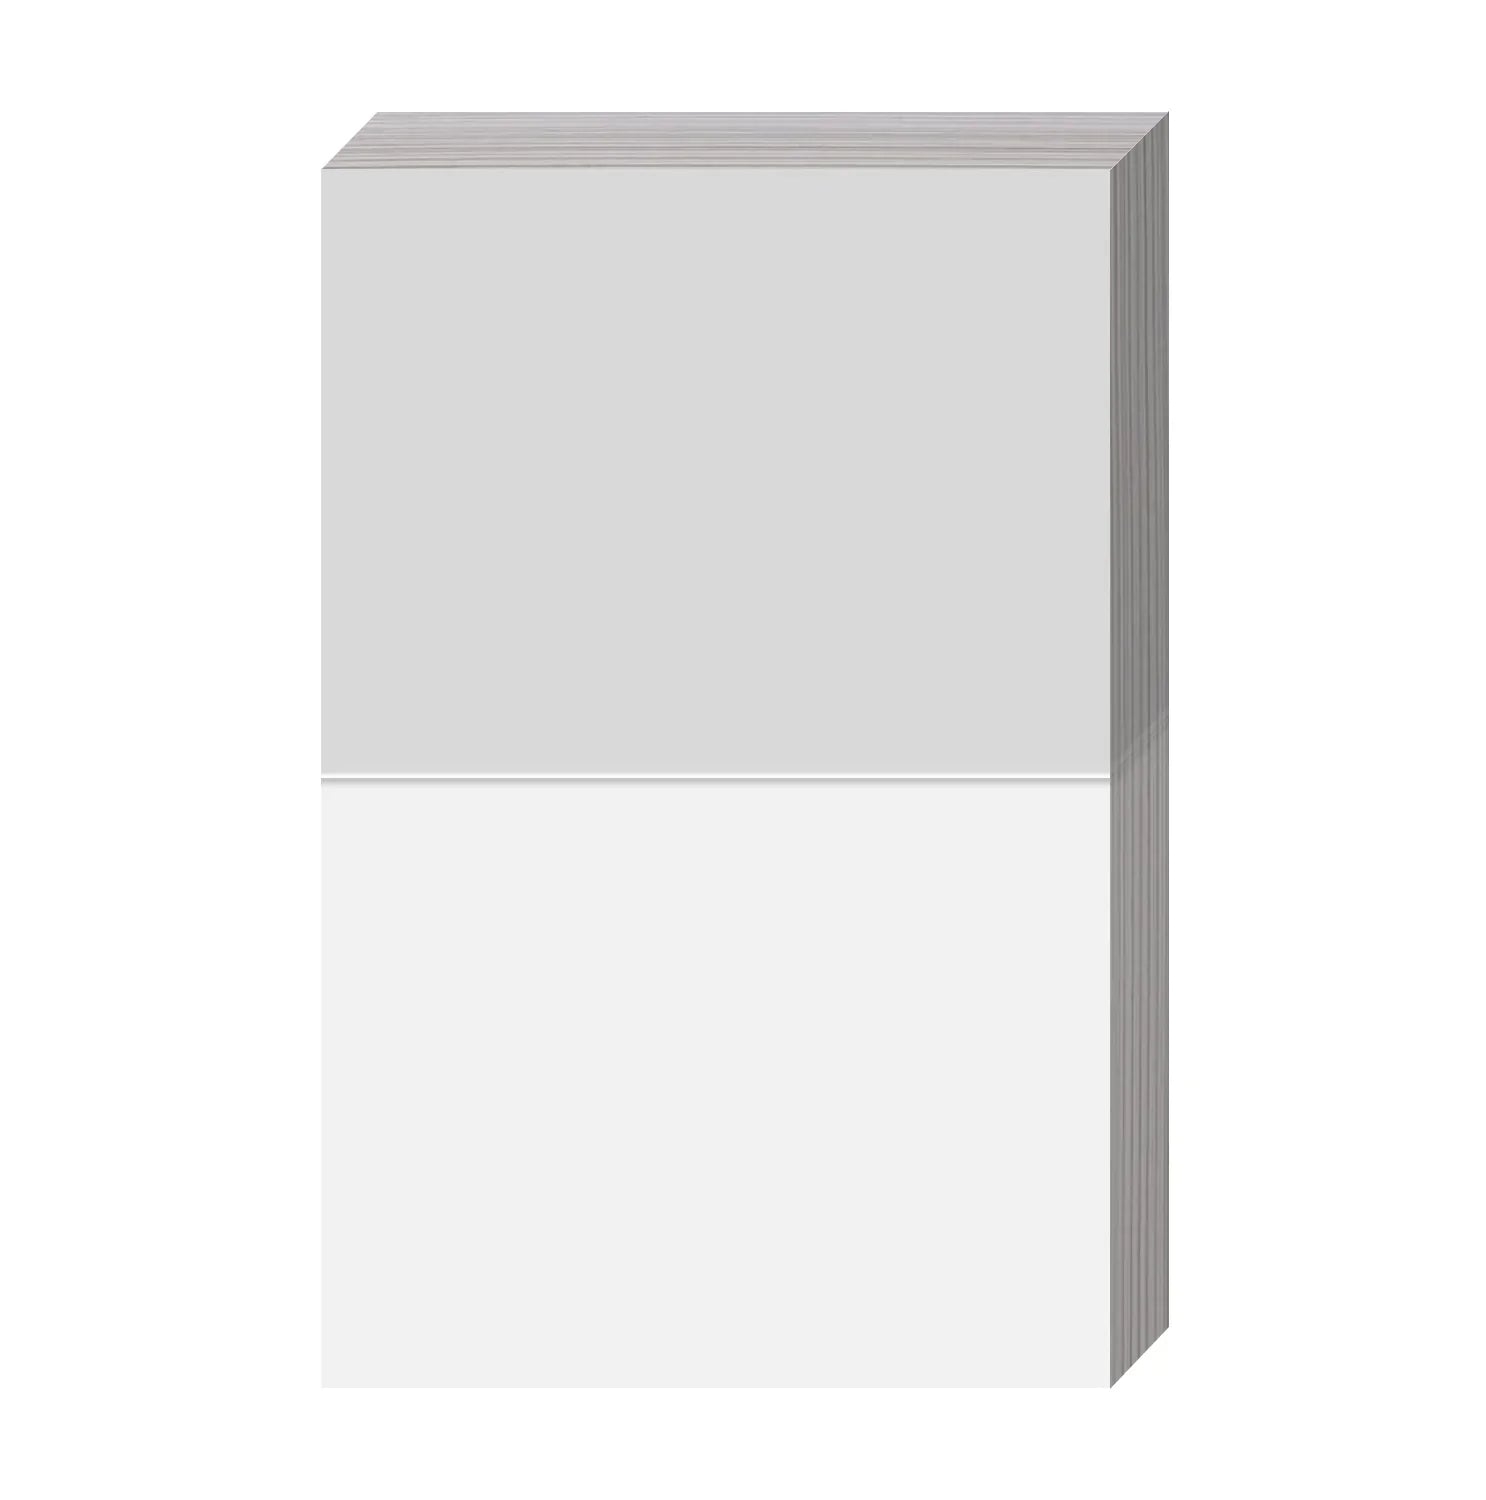 Blank White 5 1/2 x 8 1/2 Cardstock - Heavy 80lb Cover - Half Letter Size  5.5 x 8.5 (100 Pack)